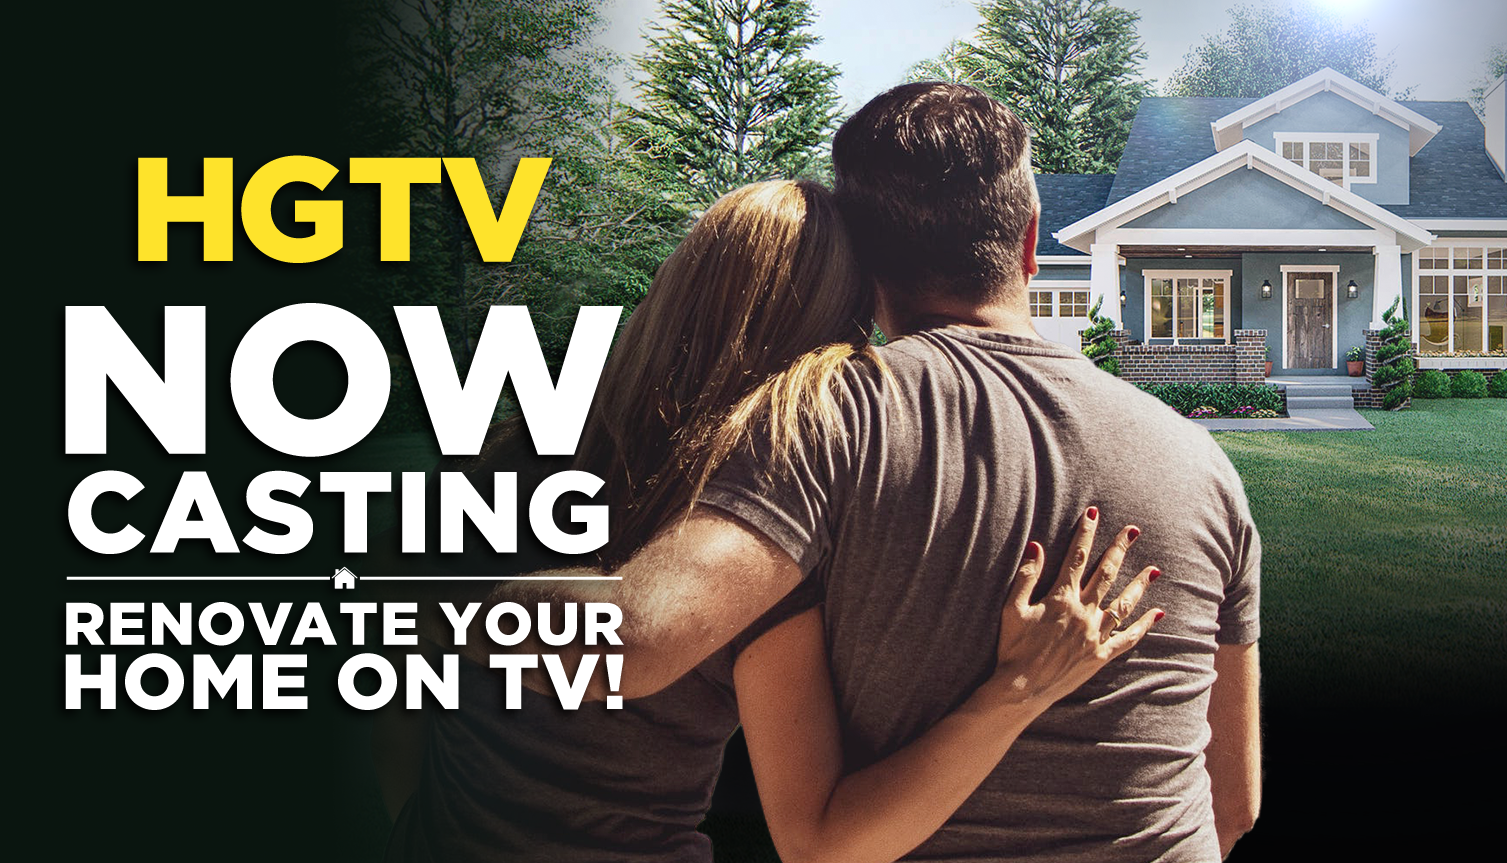 HGTV Now Casting Couples in Dallas/Ft. Worth to Renovate Their Homes on a Brand New TV Show!